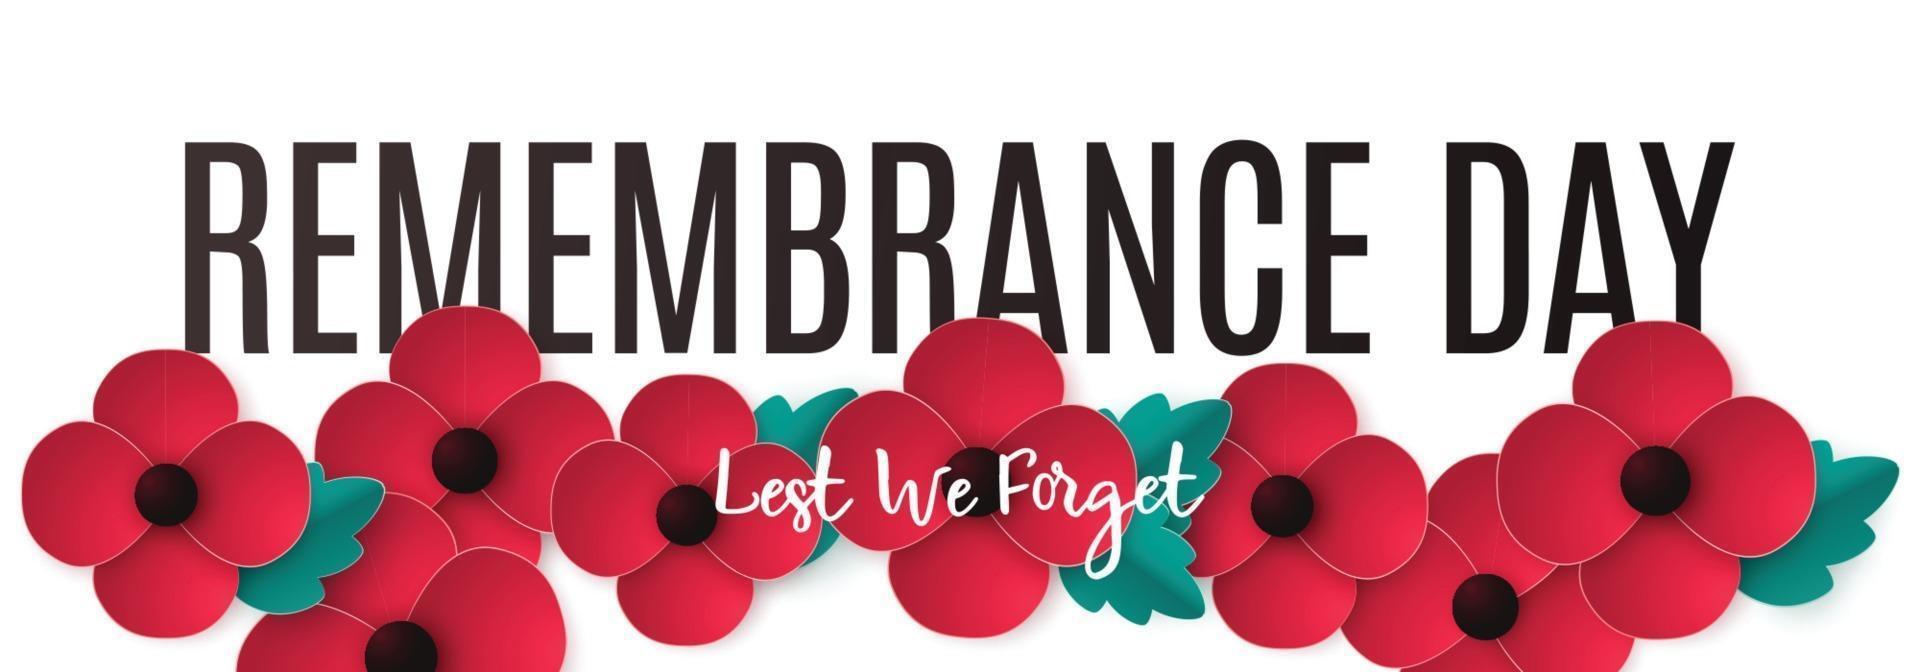 Remembrance day greeting long banner of poppy flowers vector